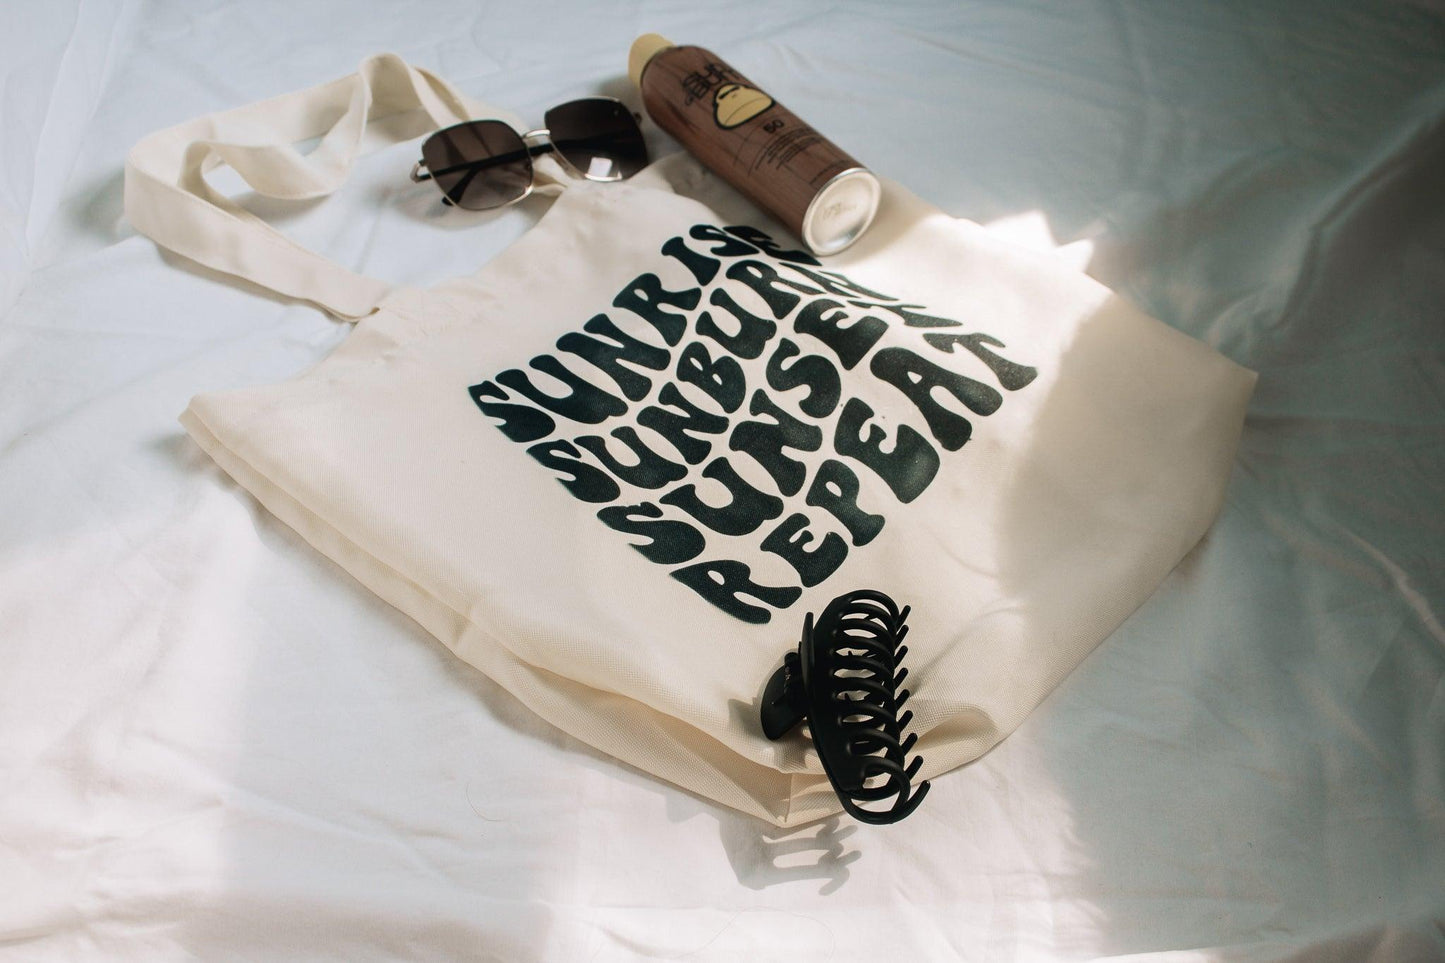 An angled photo of a beige tote bag laying on a white sheet. The bag says sunrise, sunburn, sunset, repeat in groovy text. There is a claw hair clip, sunglasses, sunscreen laying on and around the bag for styling.